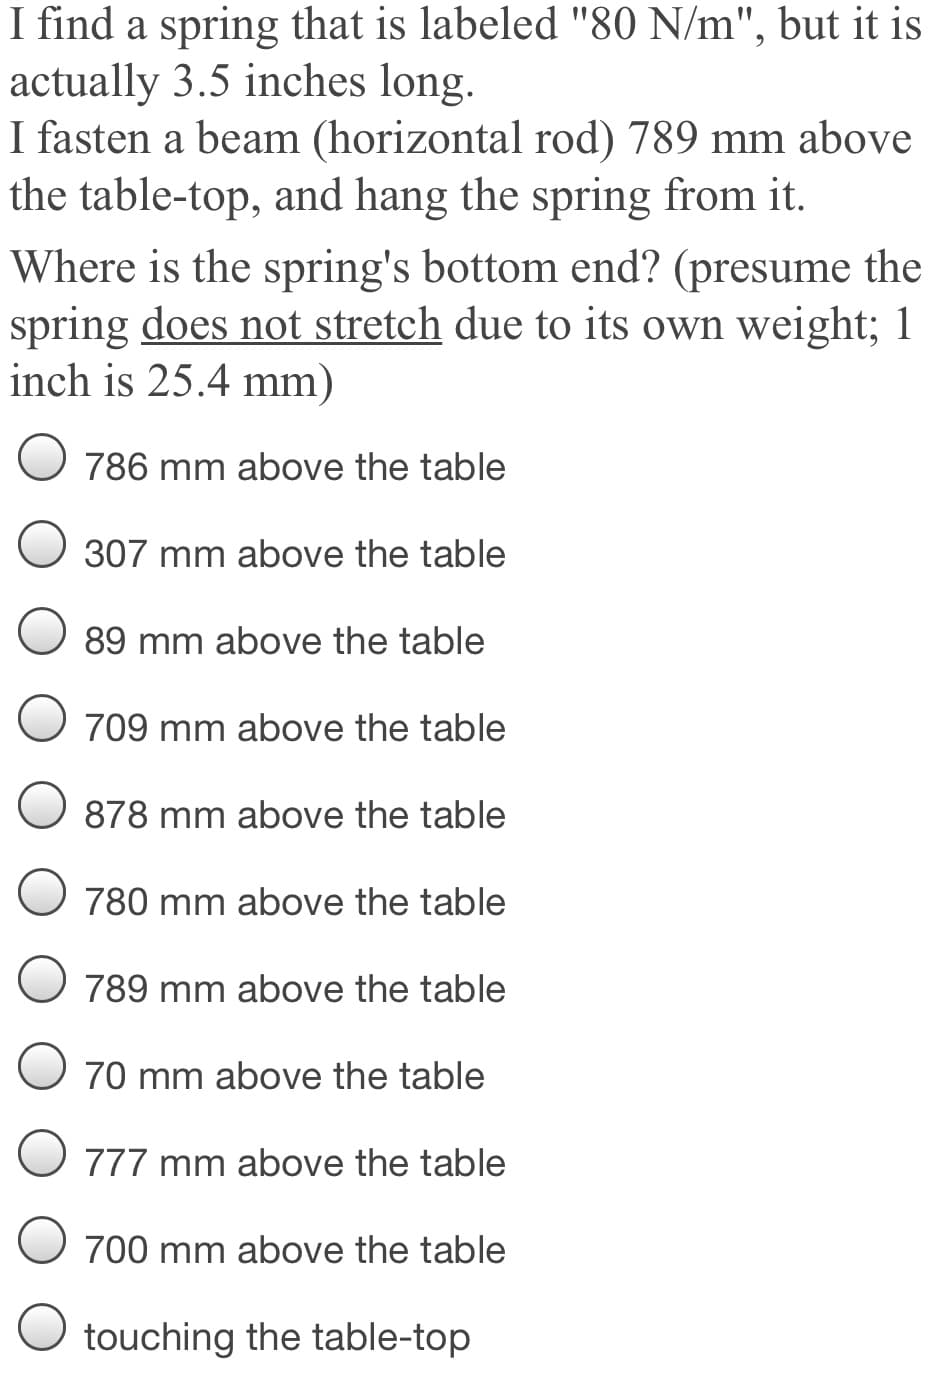 I find a spring that is labeled "80 N/m", but it is
actually 3.5 inches long.
I fasten a beam (horizontal rod) 789 mm above
the table-top, and hang the spring from it.
Where is the spring's bottom end? (presume the
spring does not stretch due to its own weight; 1
inch is 25.4 mm)
786 mm above the table
307 mm above the table
89 mm above the table
709 mm above the table
878 mm above the table
780 mm above the table
789 mm above the table
70 mm above the table
O 777 mm above the table
700 mm above the table
O touching the table-top
